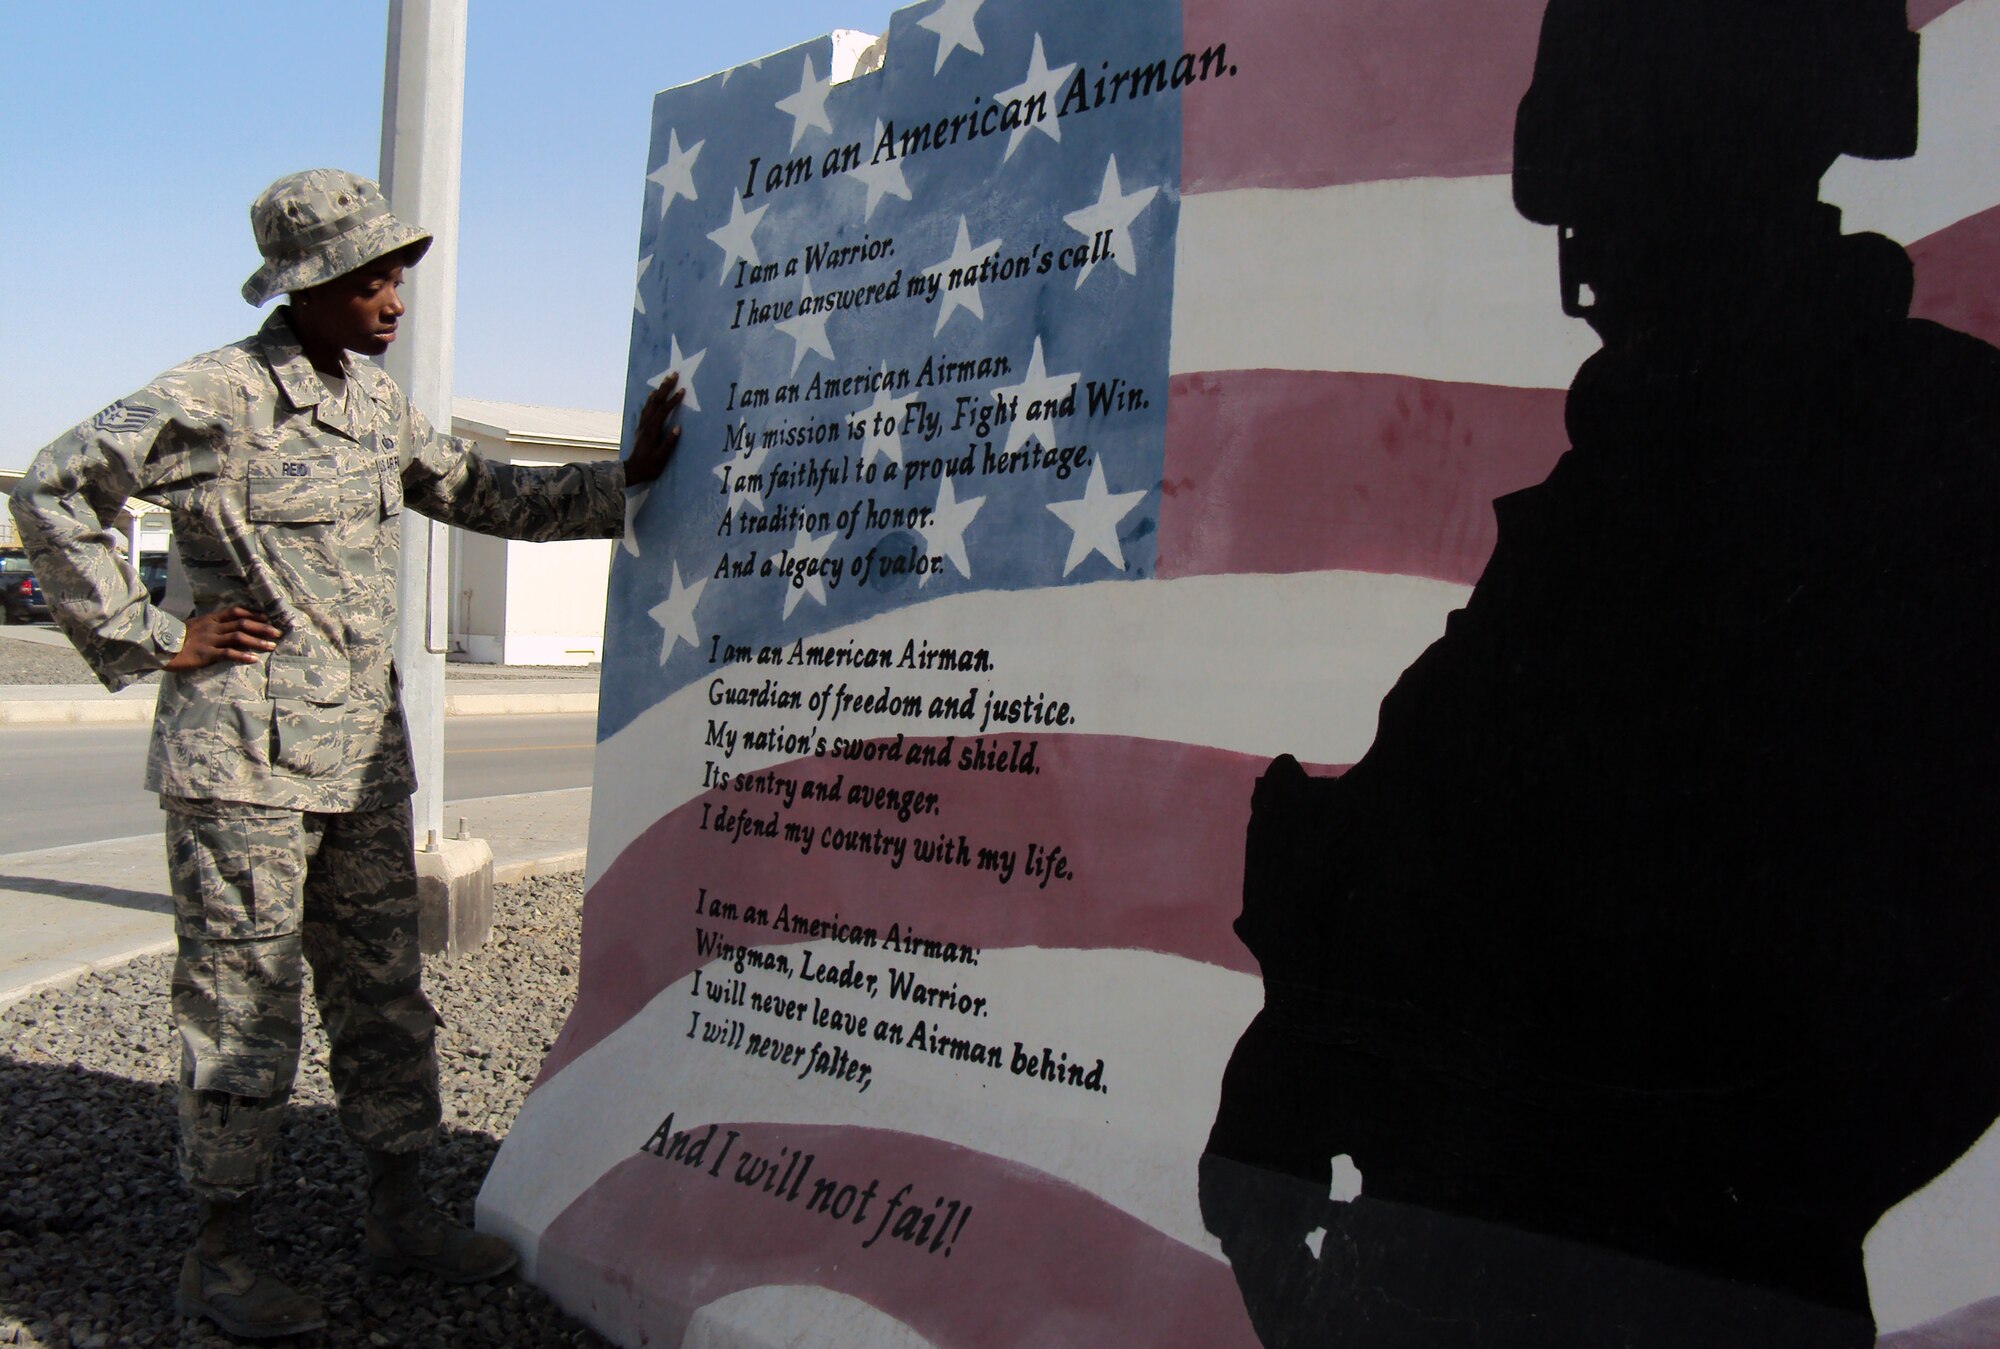 Staff Sgt. Sparkle Reid, a services journeyman, is deployed as the non-appropriated funds custodian for the 380th Expeditionary Force Support Squadron at a non-disclosed base in Southwest Asia.  Here, she is pictured looking at a painted mural of the Airman's Creed by the 380th Air Expeditionary Wing headquarters on Feb. 25, 2010. Sergeant Reed lost her uncle, Louie A. Williams, when the World Trade Center towers came down on Sept. 11, 2001. He worked on the 66th floor of the North Tower for the New York Port Authority as a paralegal. On Feb. 27, 2009, Sergeant Reid lost her father, Charles T. Reid, after complications from surgery. She credits both her uncle and her father as her inspiration for serving. Sergeant Reid is deployed from from the 48th Force Support Squadron at RAF Lakenheath, England, and her hometown is Queens, N.Y. (U.S. Air Force Photo/Master Sgt. Scott T. Sturkol/Released)